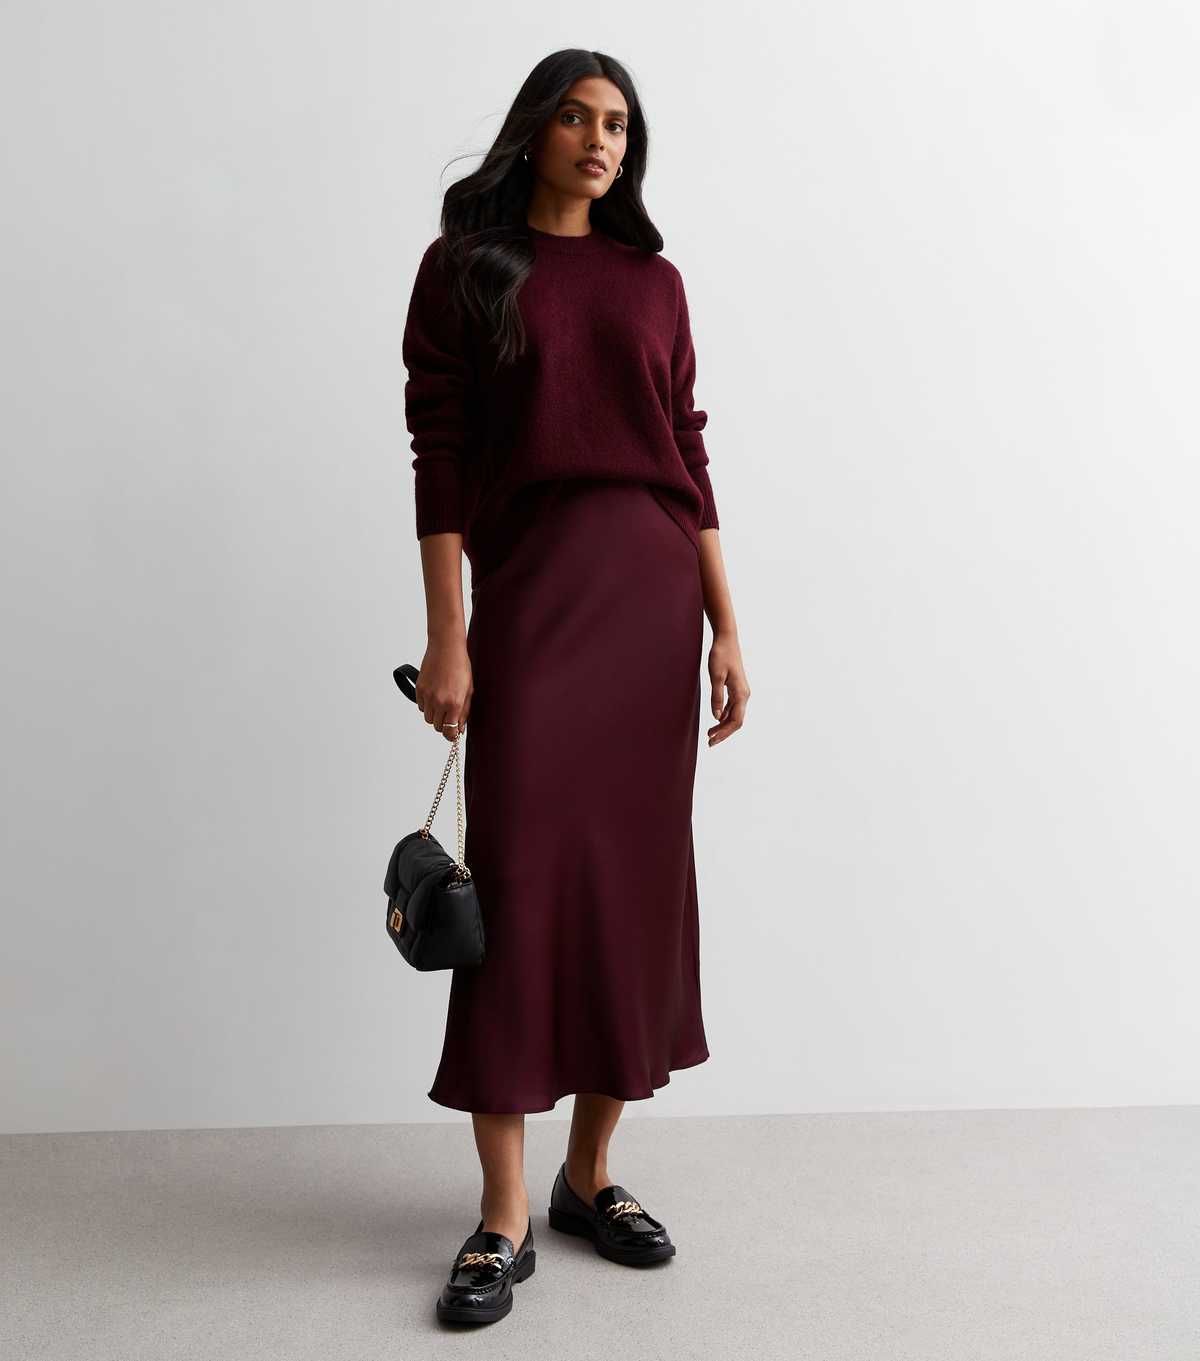 Burgundy Satin Bias Cut Midaxi Skirt
						
						Add to Saved Items
						Remove from Saved Item... | New Look (UK)